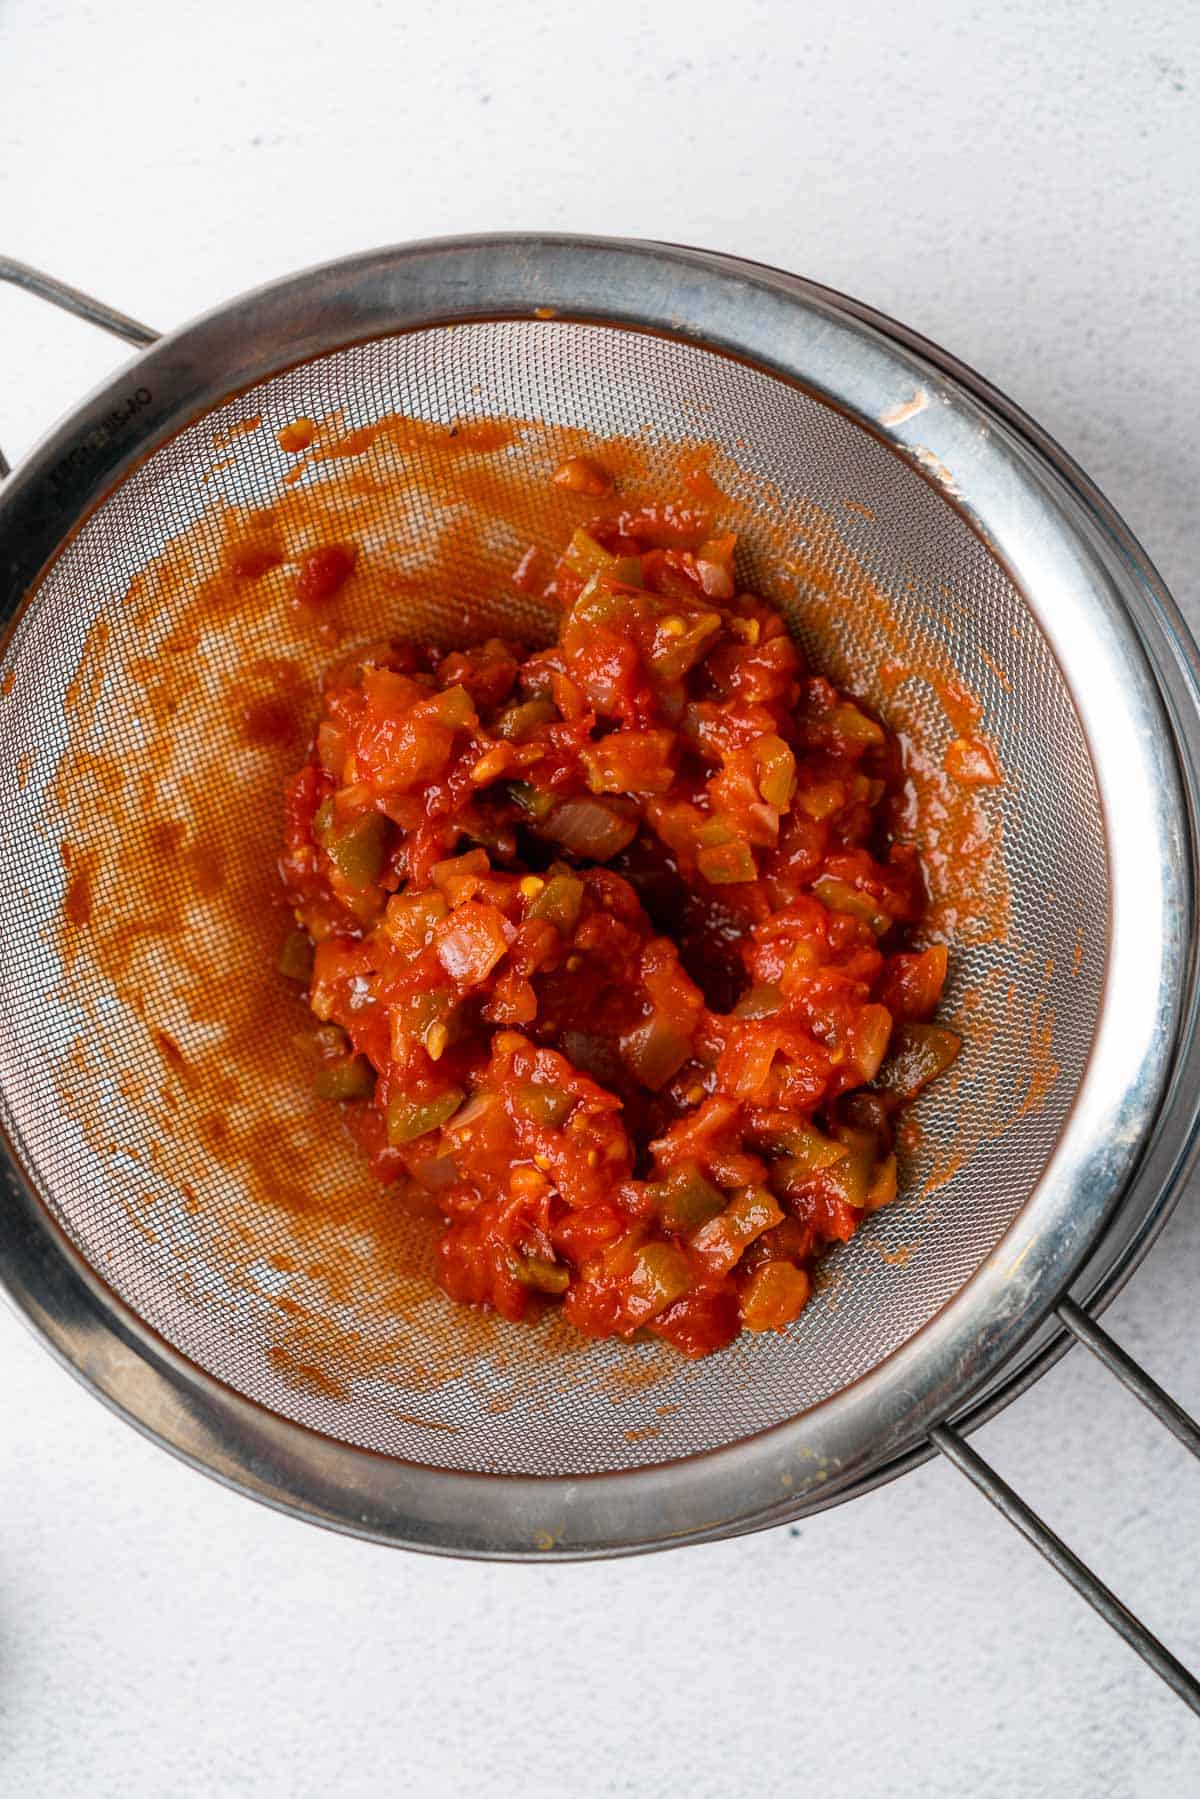 chunky salsa being strained through a metal sieve